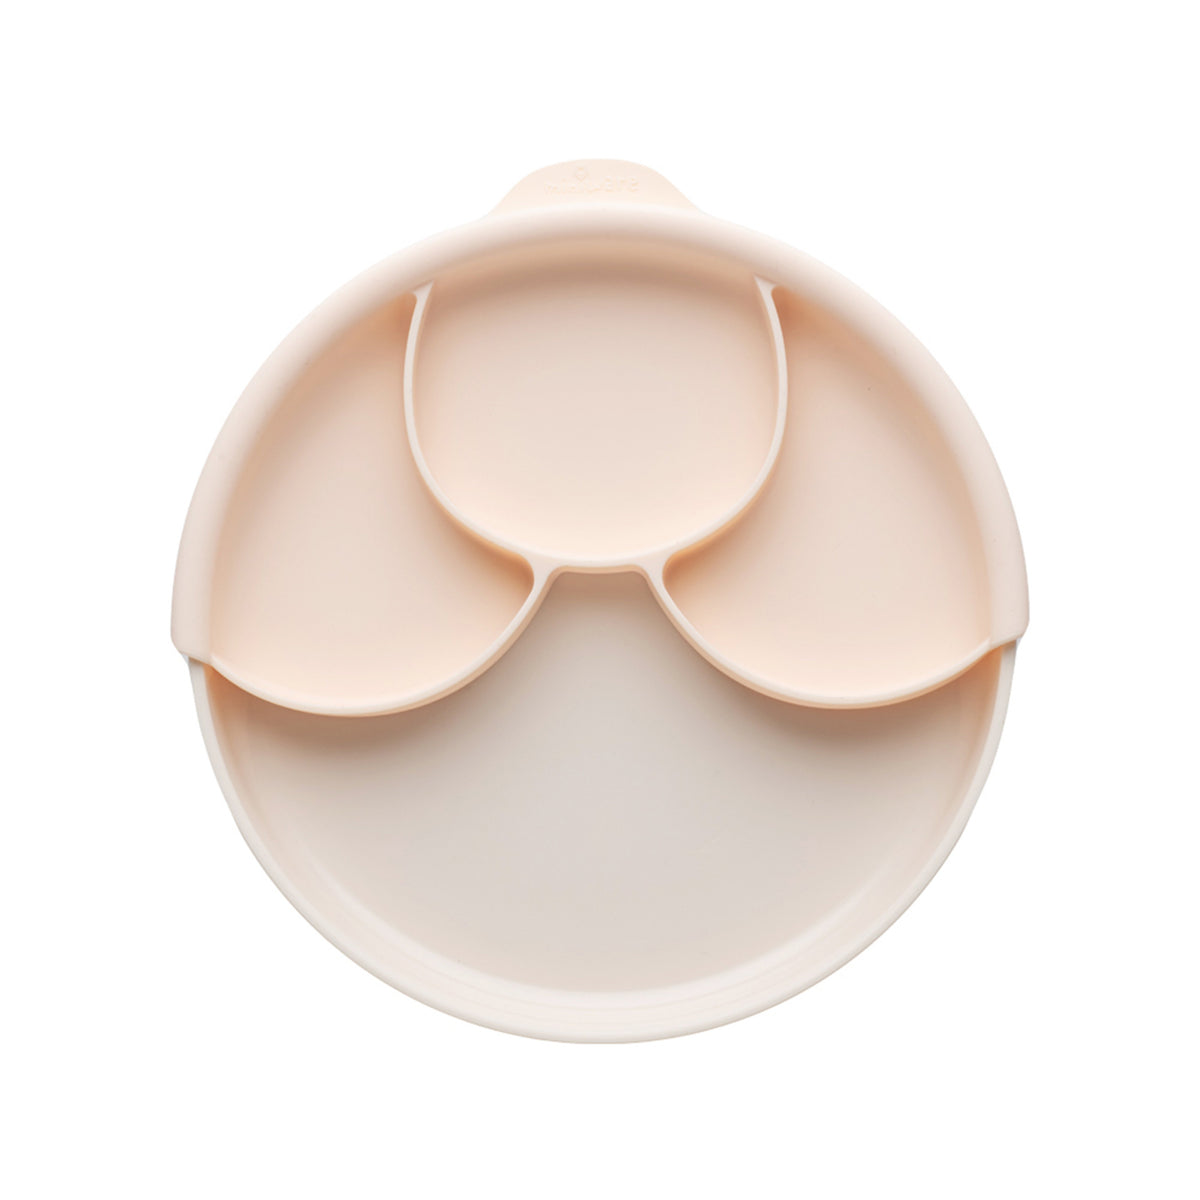 miniware-healthy-meal-set-pla-smart-divider-suction-plate-in-vanilla-+-silicone-divider-in-peach- (1)